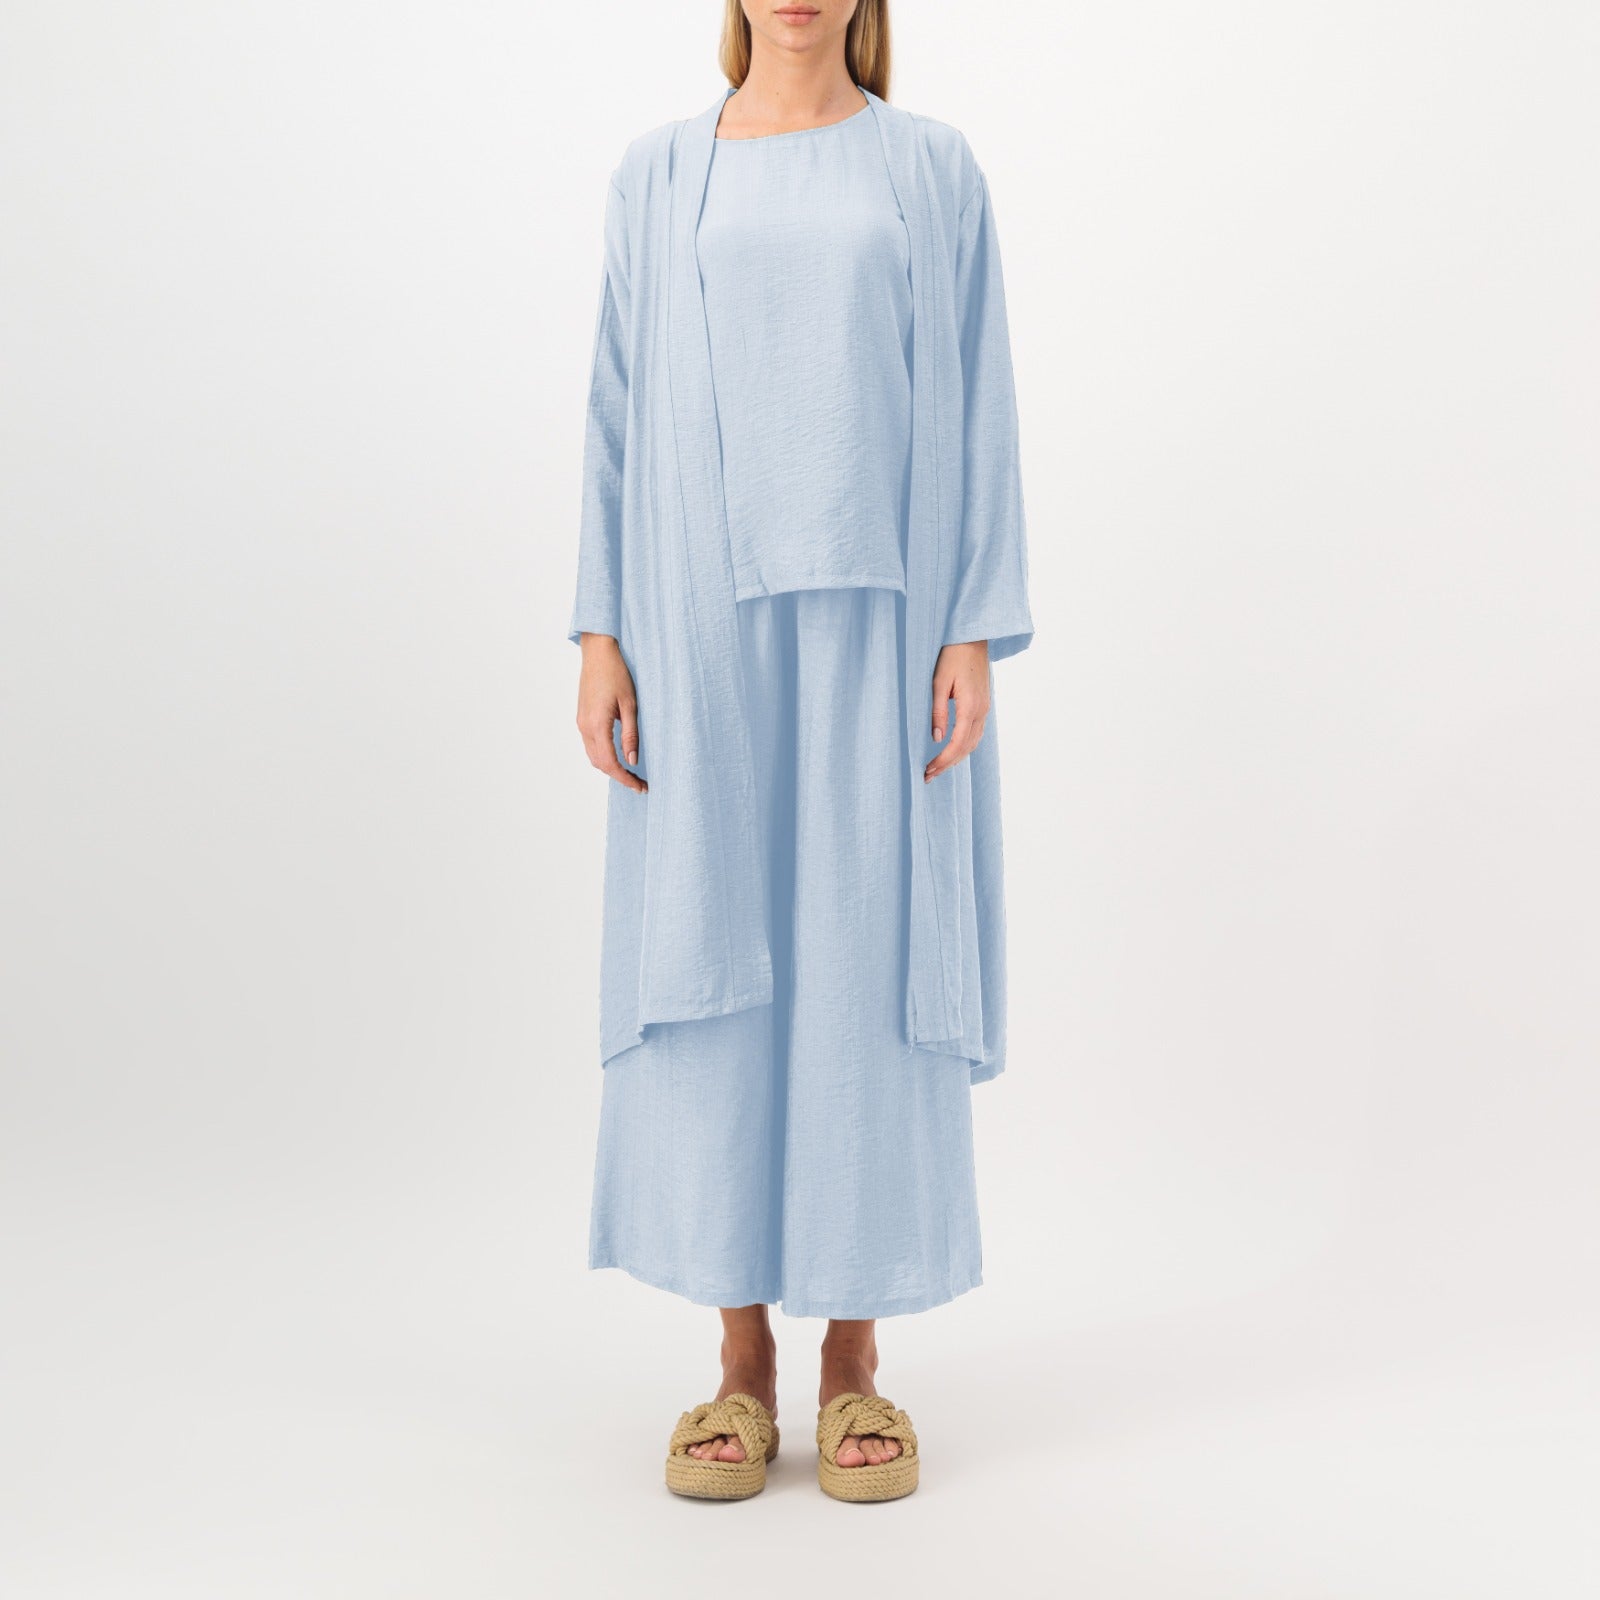 Powder Blue | All Day Closet Set of 3 - Comfortable style in attractive colors -arabian outfit - casual setcasual set - all day outfits - closet fashion store